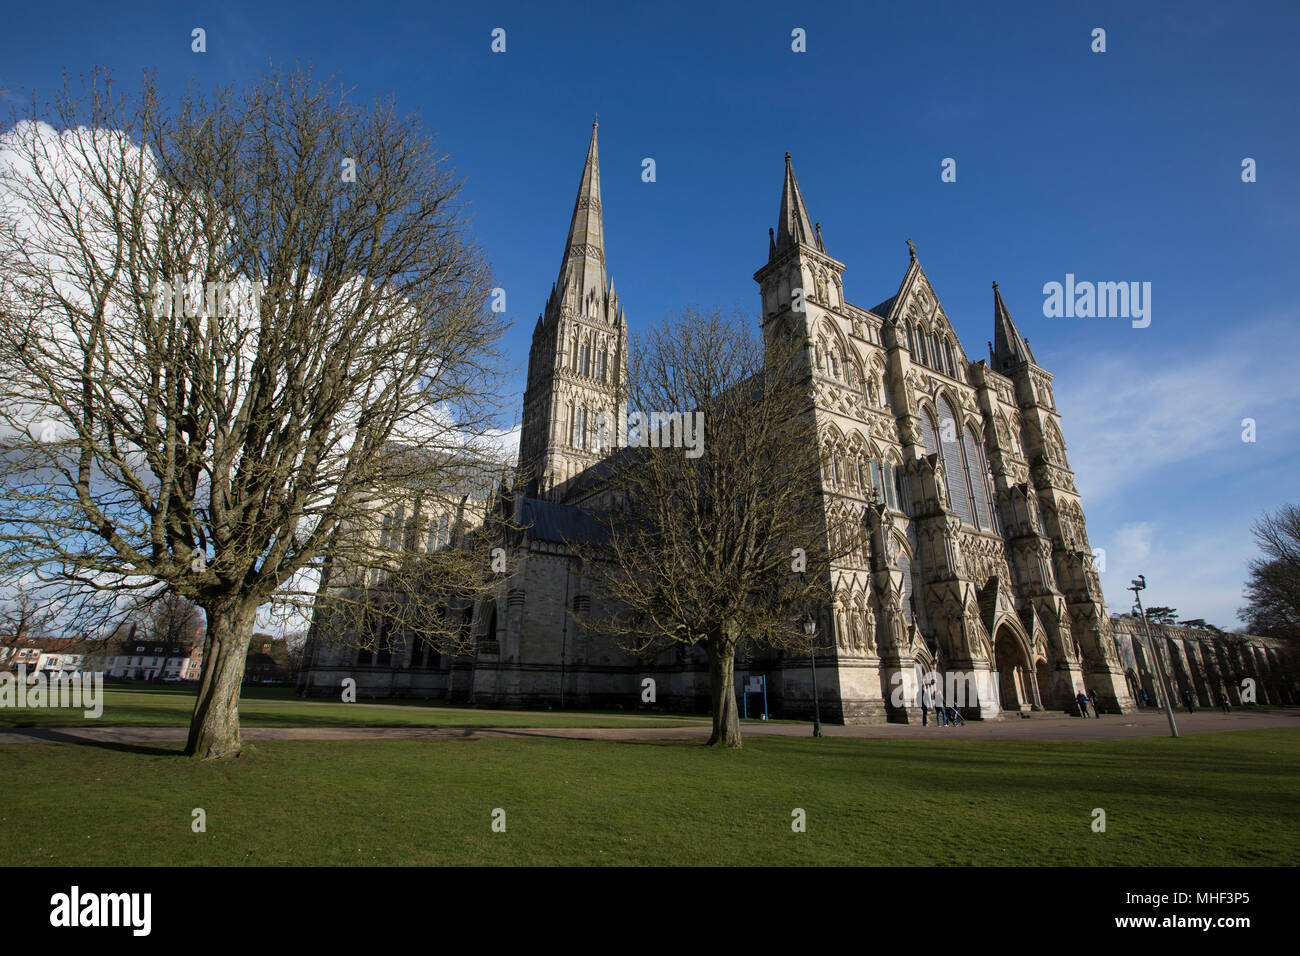 Salisbury Cathedral town where in the distance investigations continue to investigate the nerve agent attack on Sergei and Yulia Skripal, Wiltshire UK Stock Photo